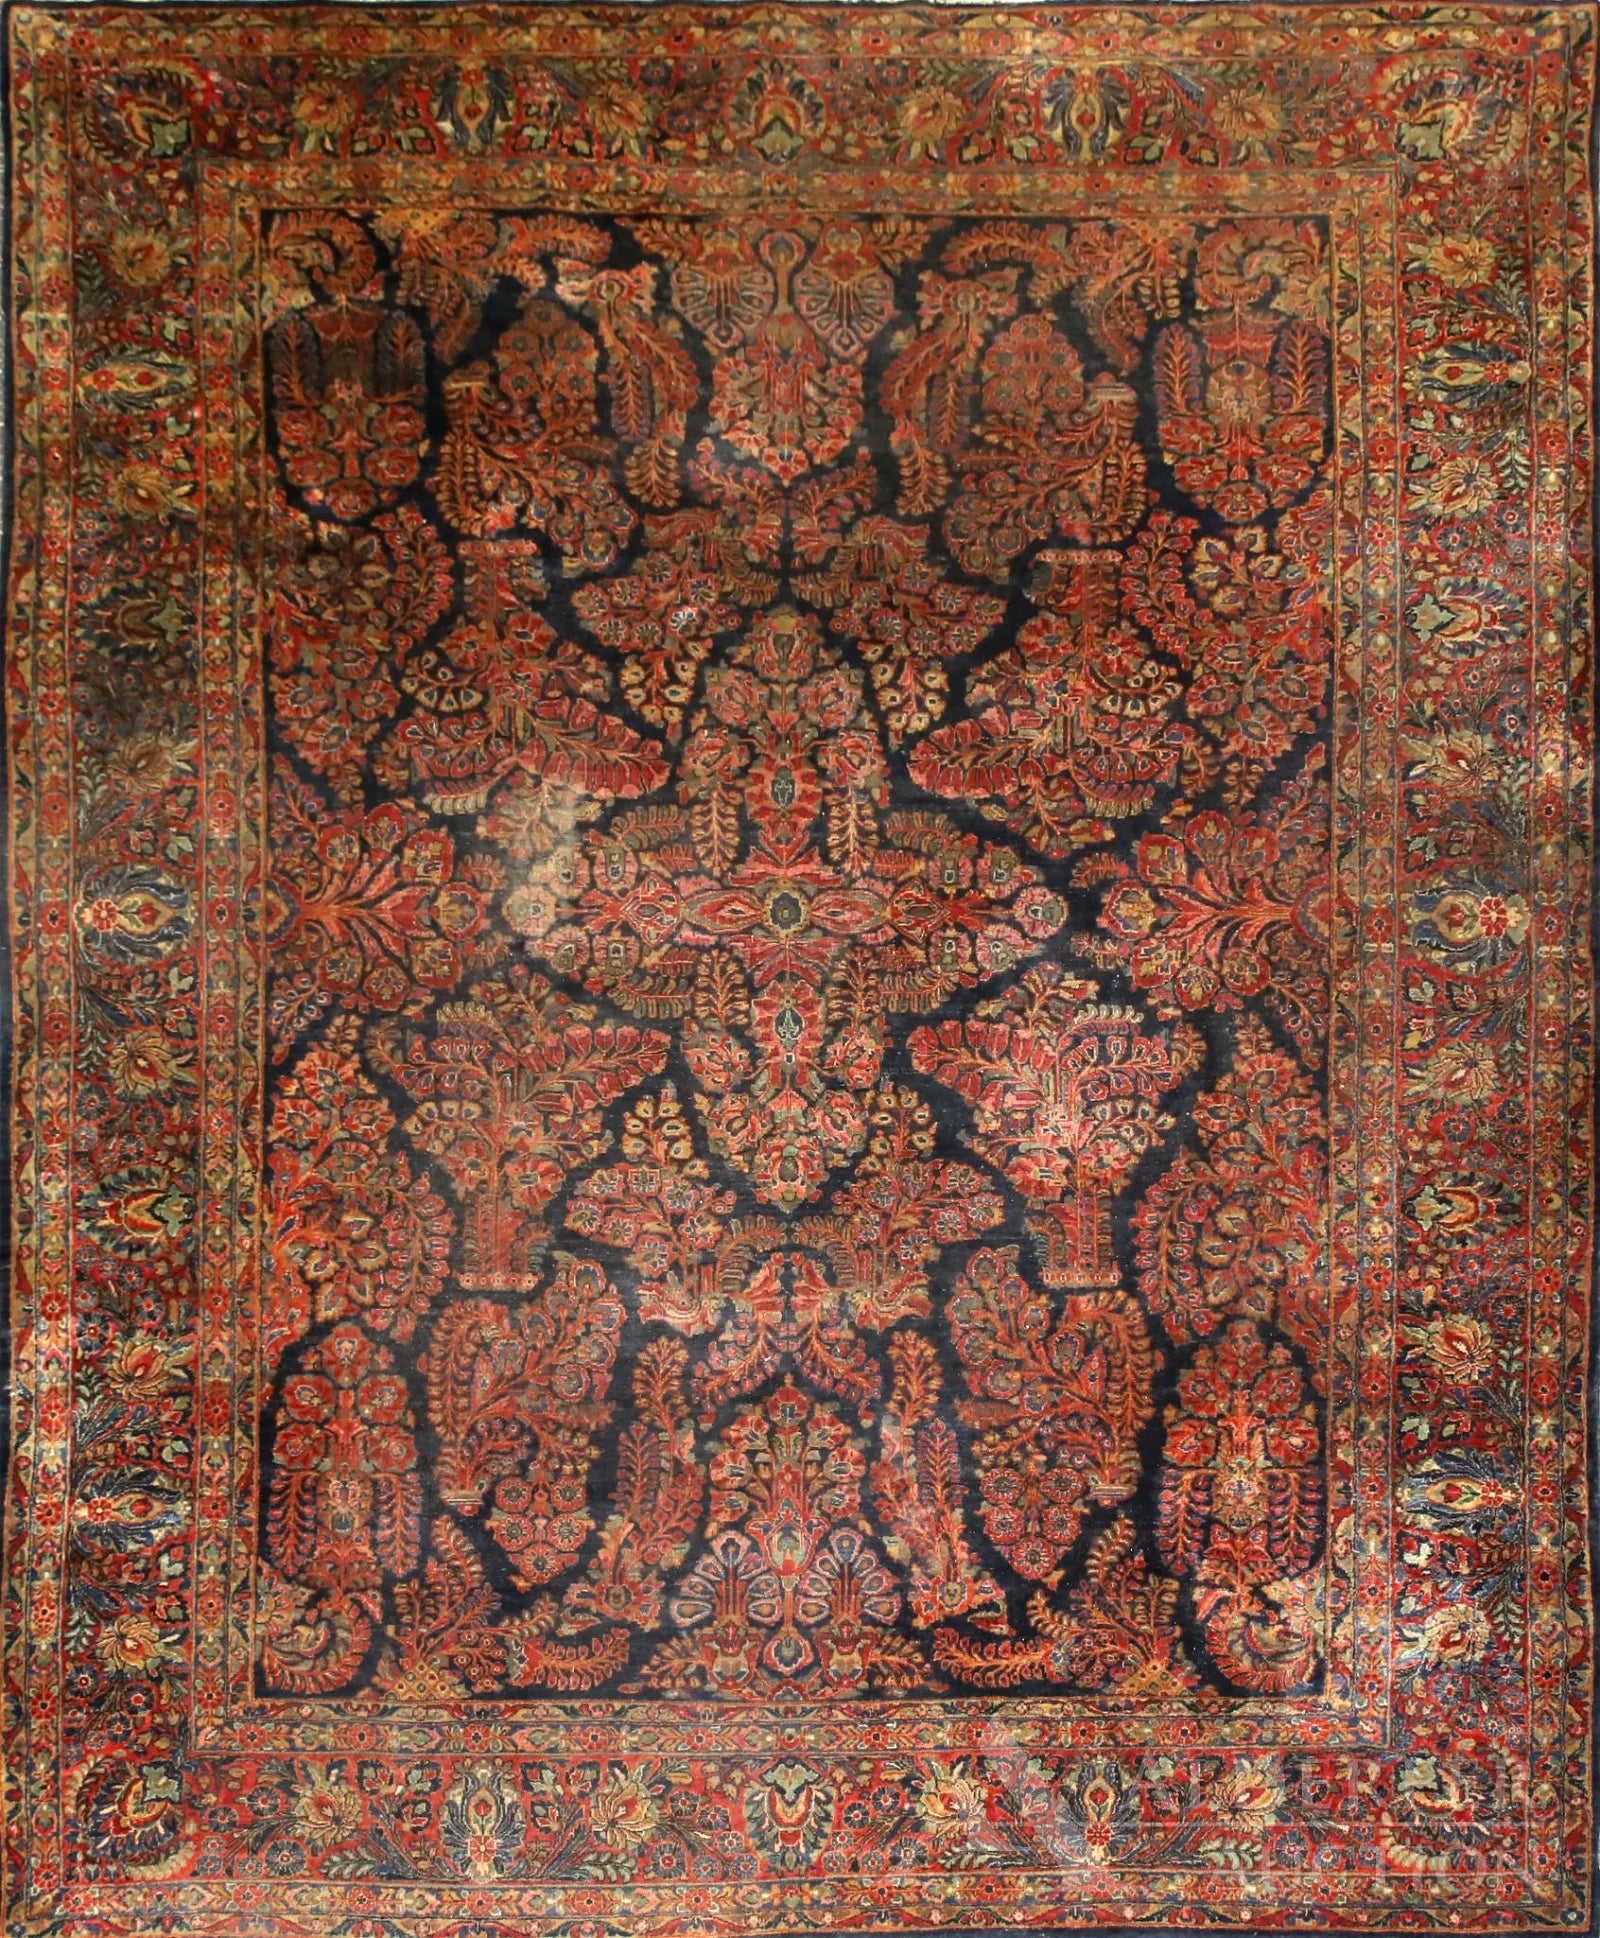 OR6-007: Early 20th Century Persian Sarouk room Size Rug